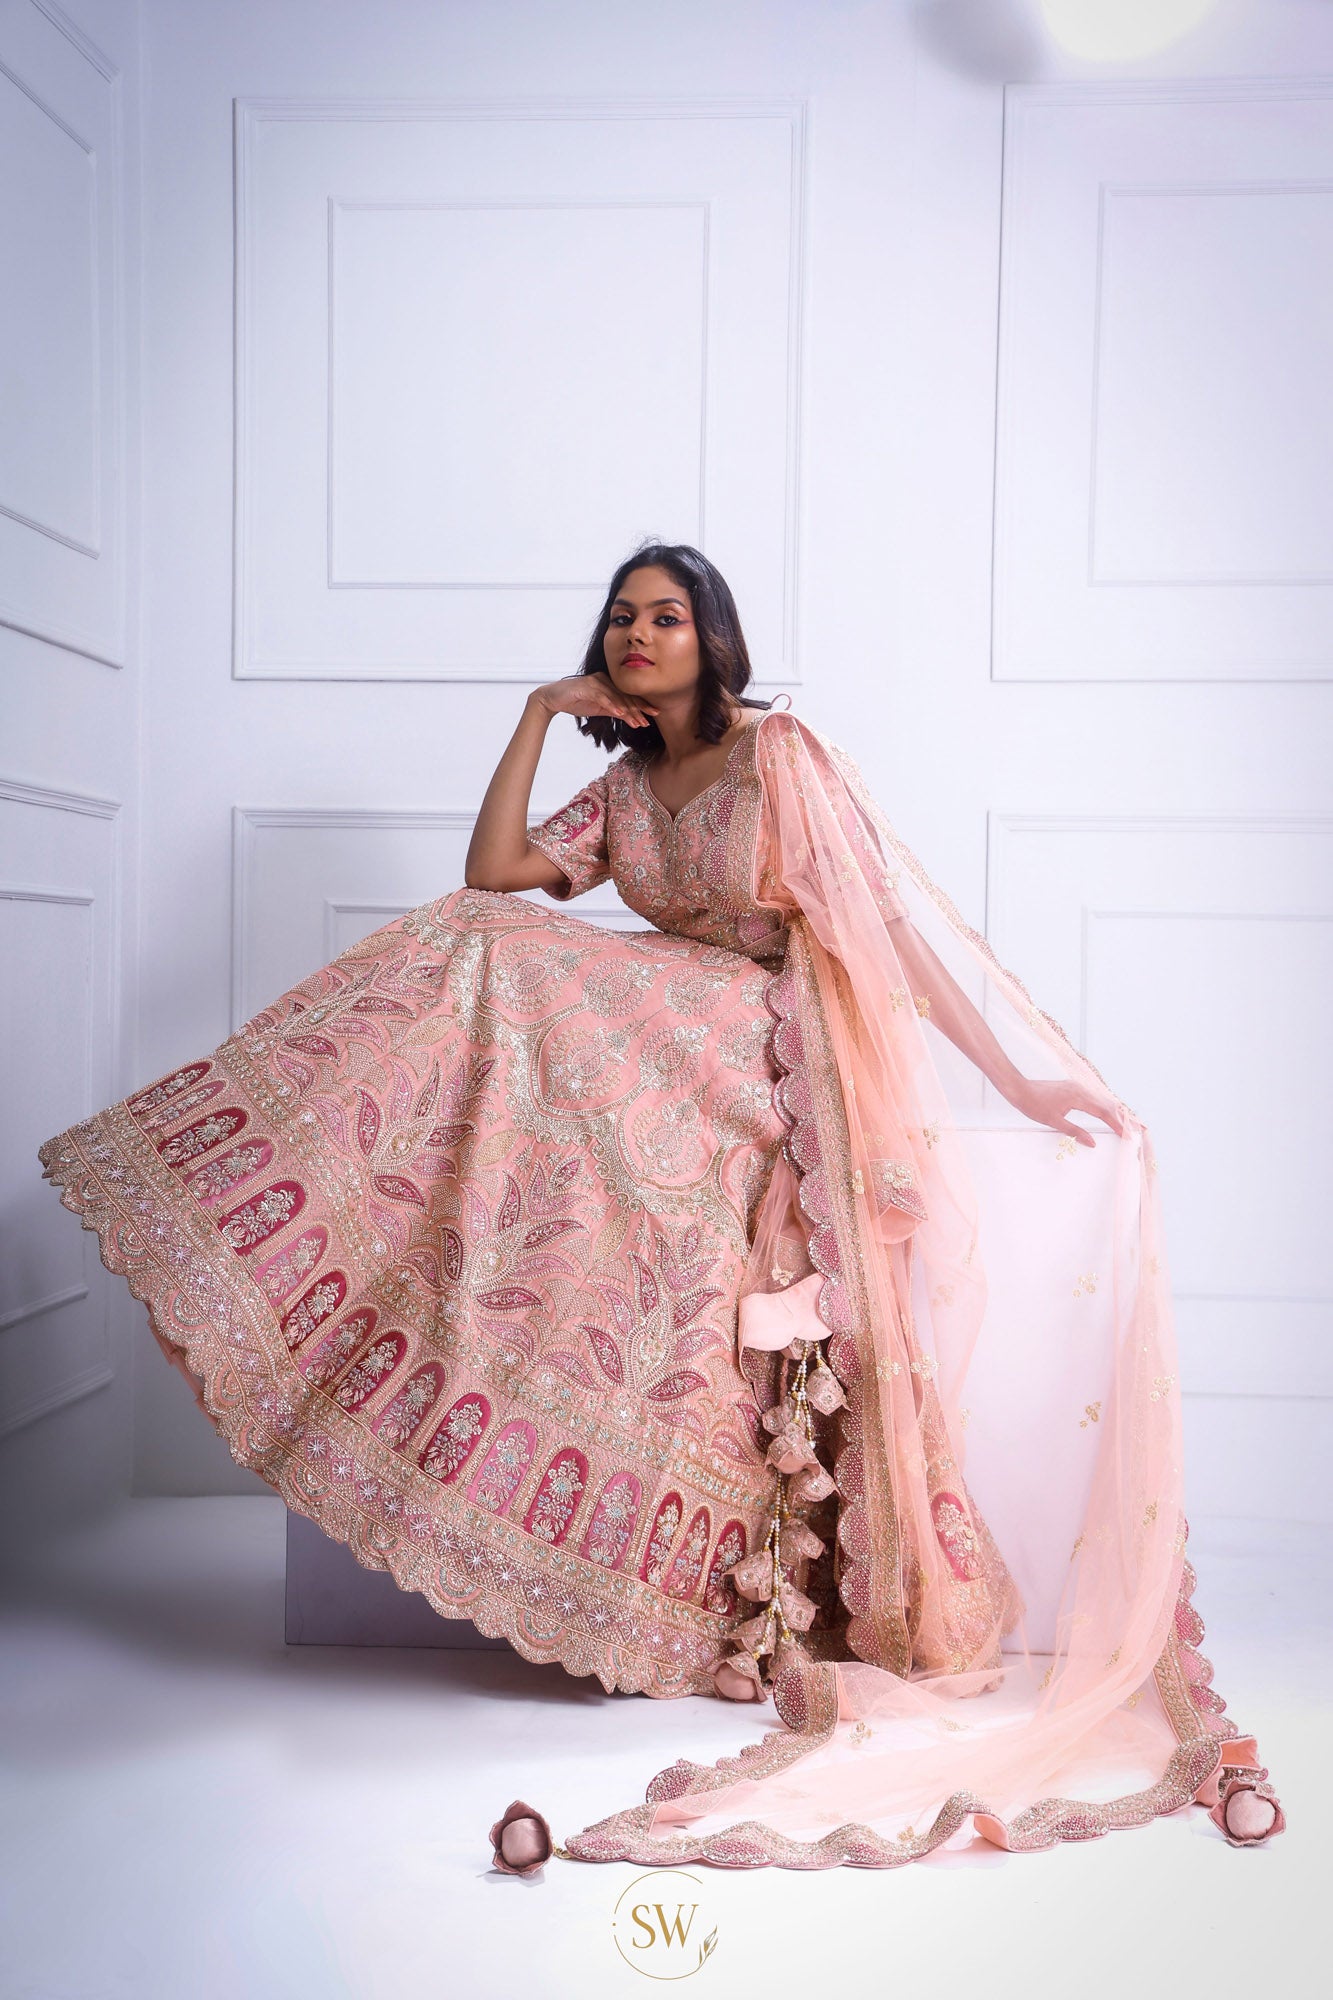 Baby Pink Bridal Lehenga With Hand Embroidery